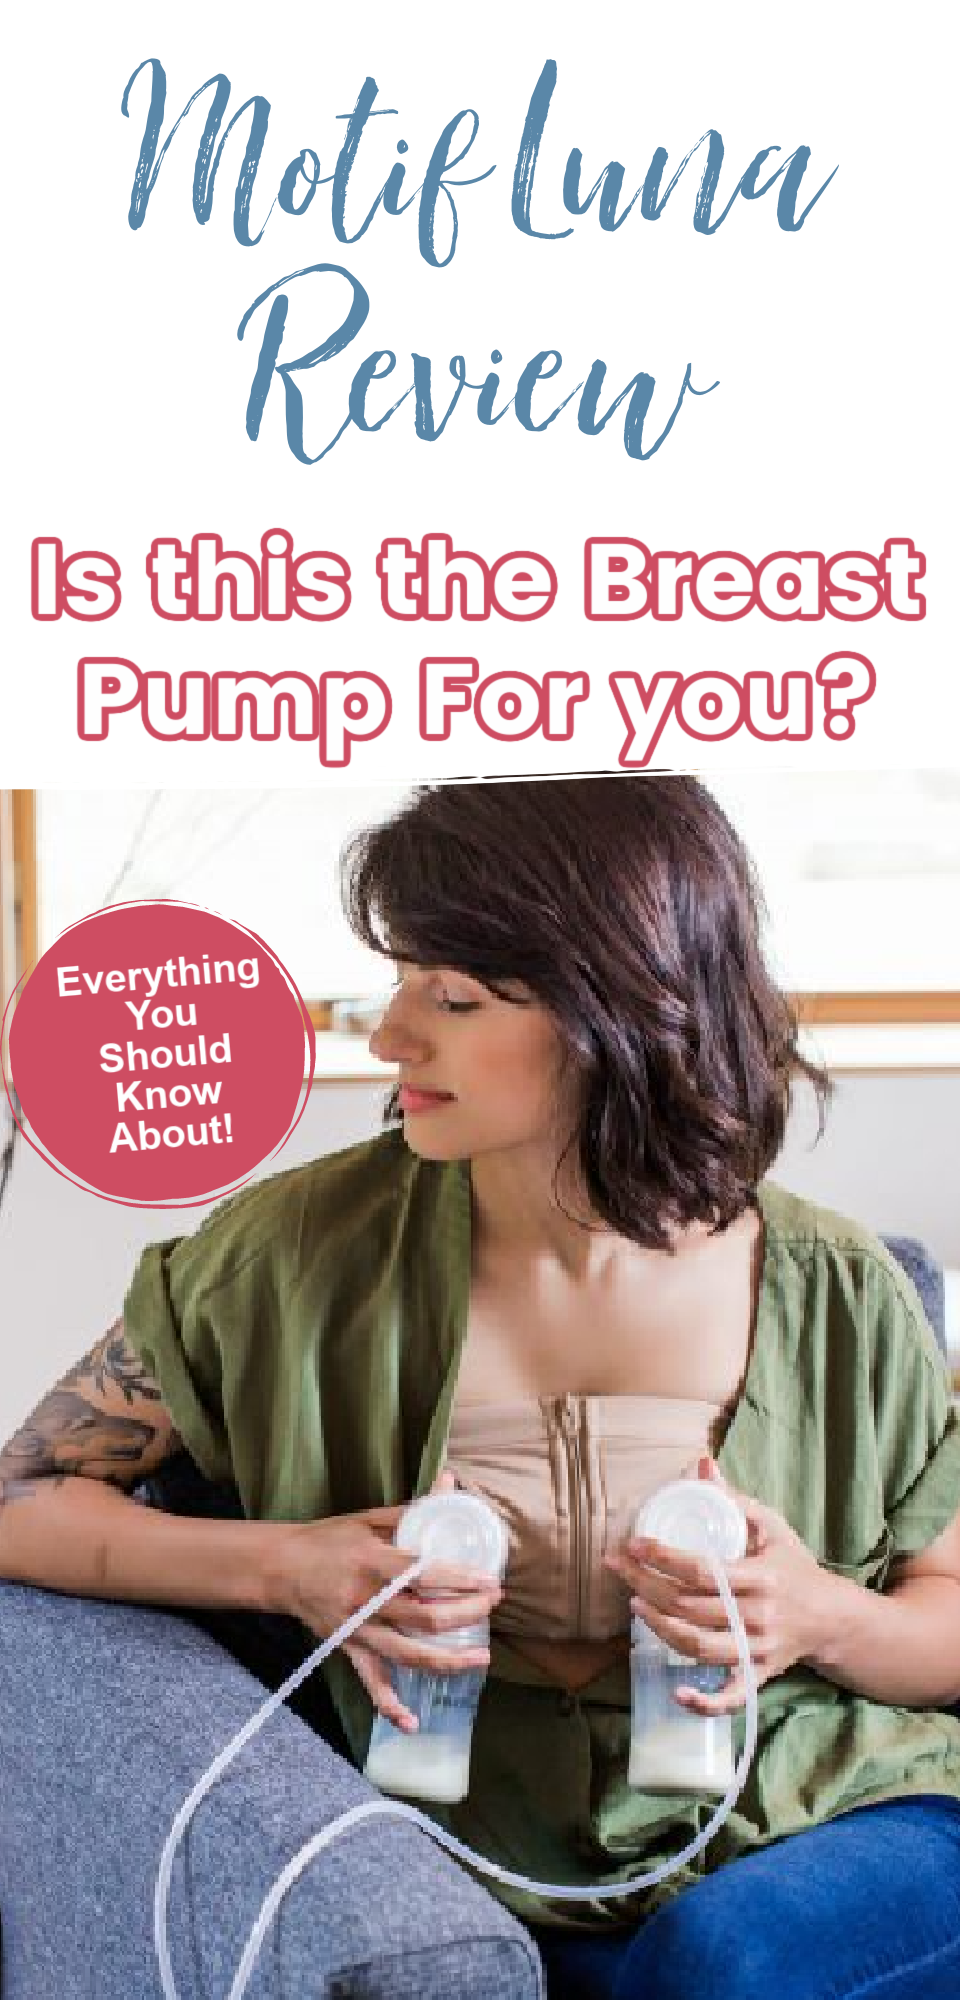 The Motif Luna Breast Pump: Is this the Breast Pump For You?